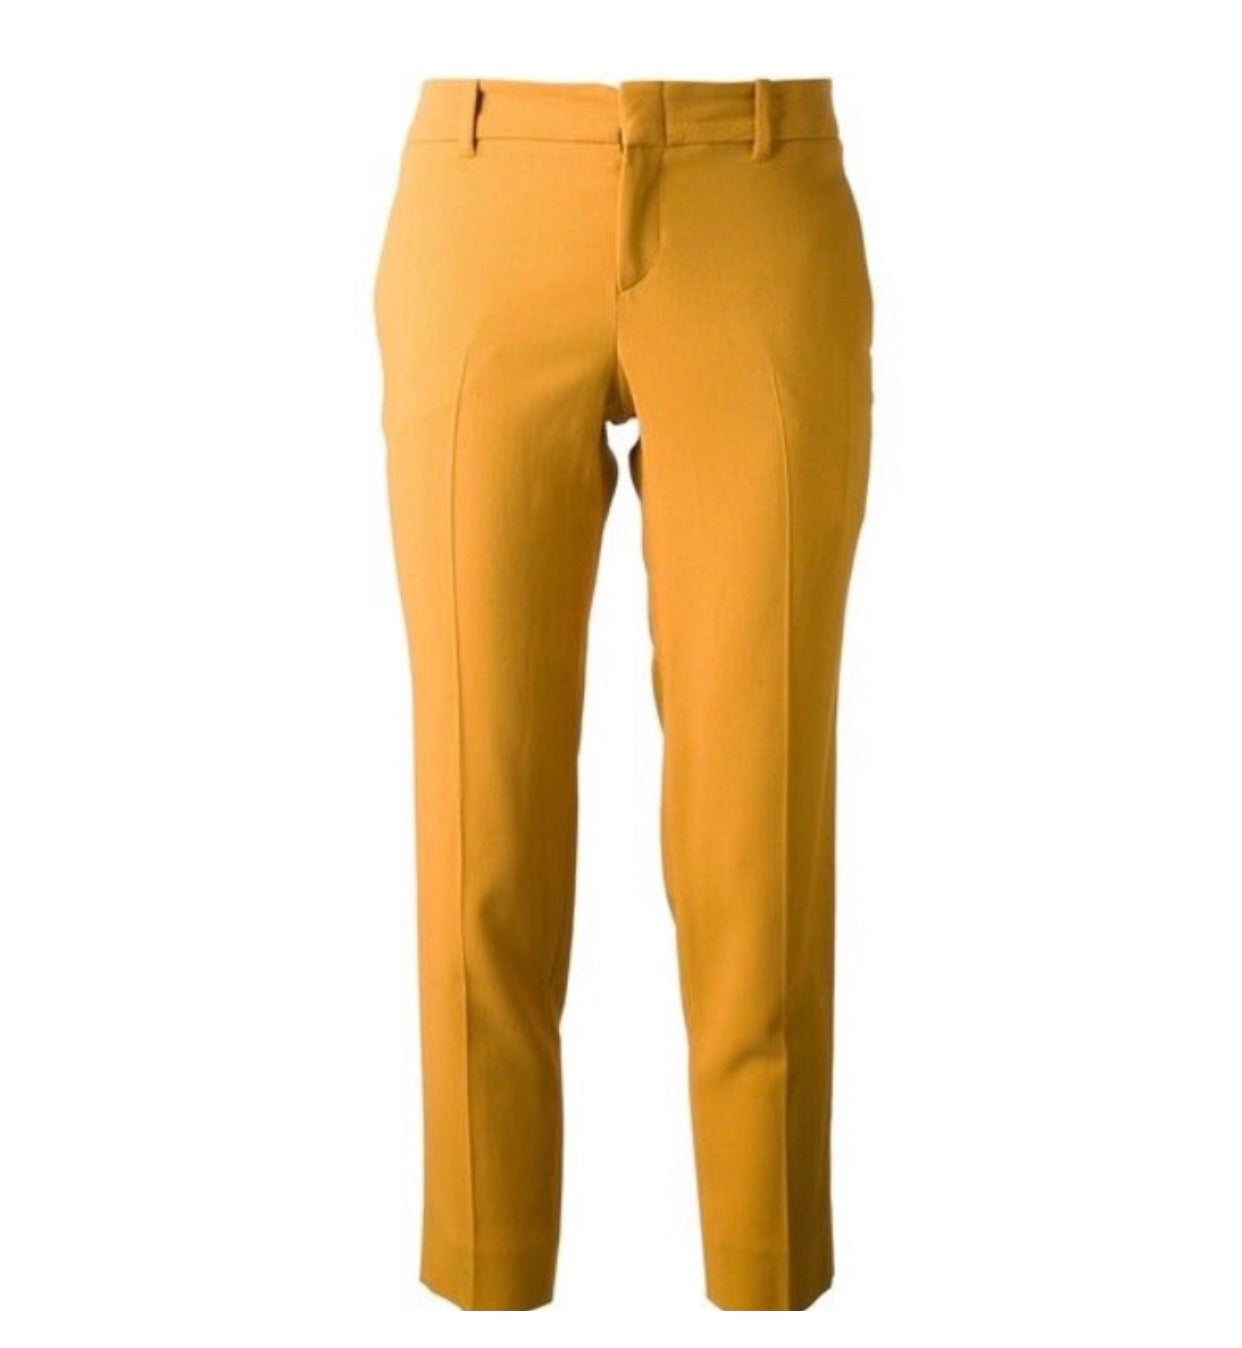 Gucci Tailored Pants Mustard - CHIC Kuwait Luxury Outlet